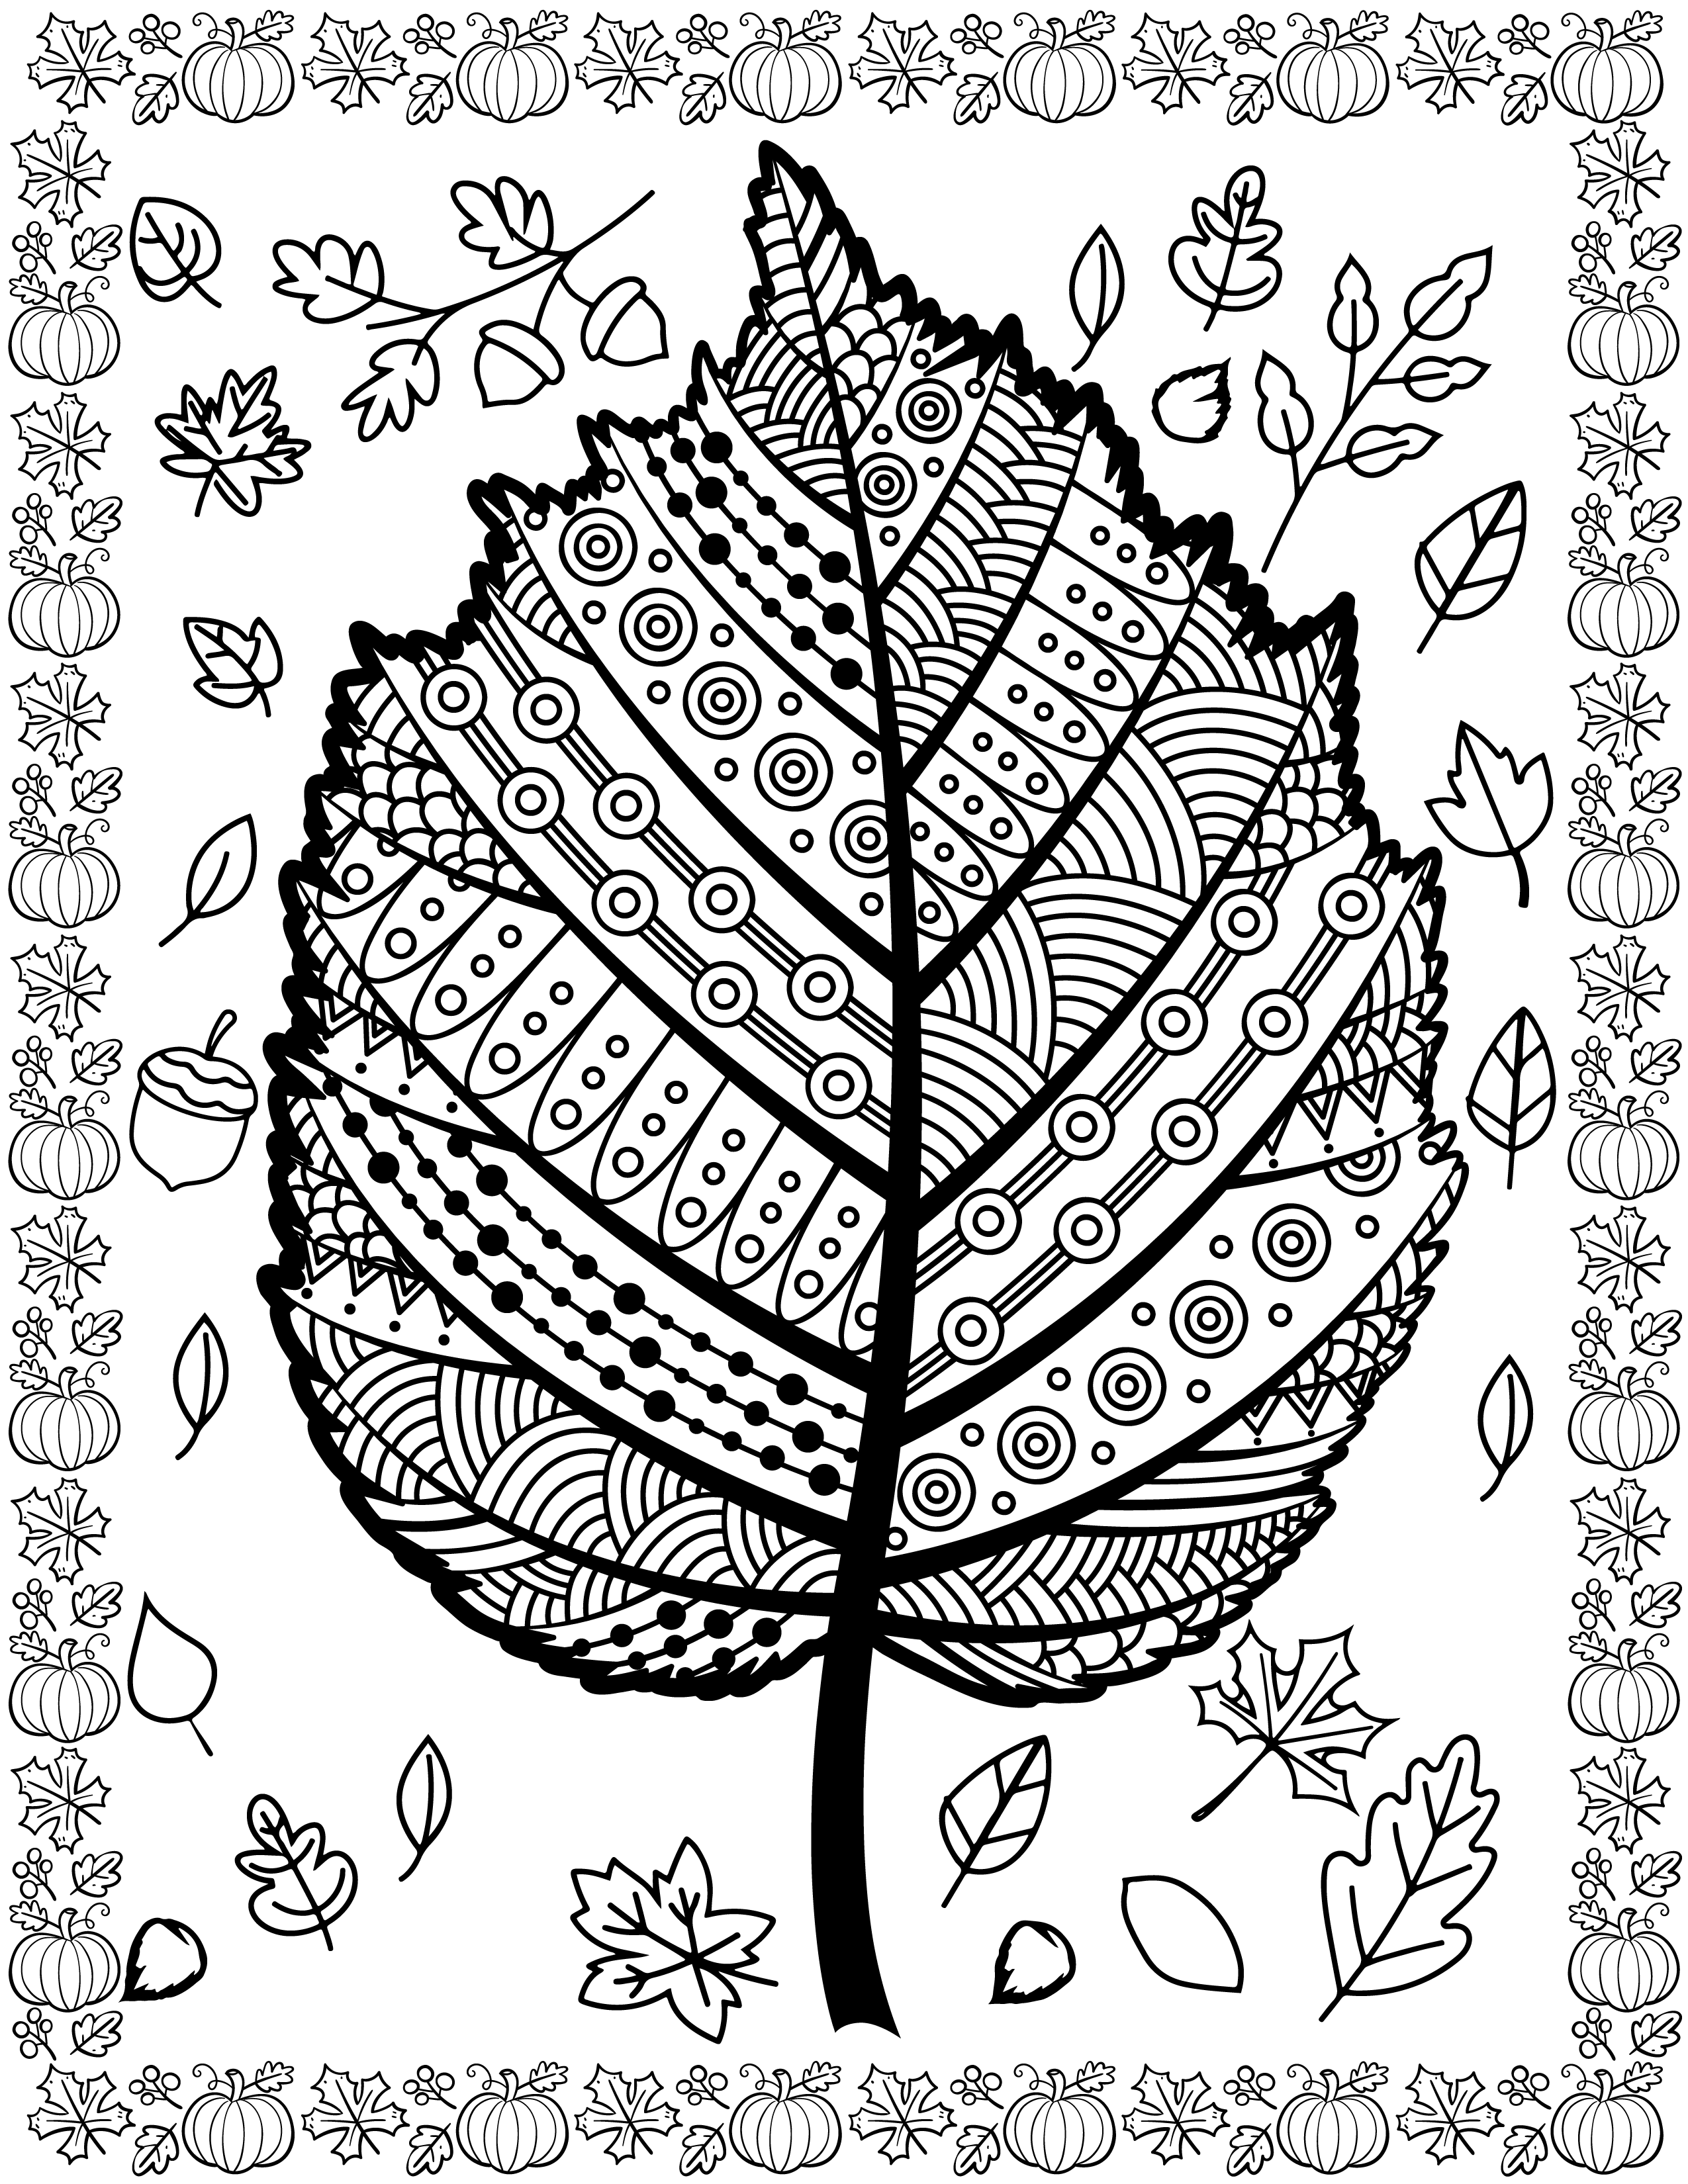 Free leaf autumn zentangle coloring page fall zentangles coloring sheets made by teachers